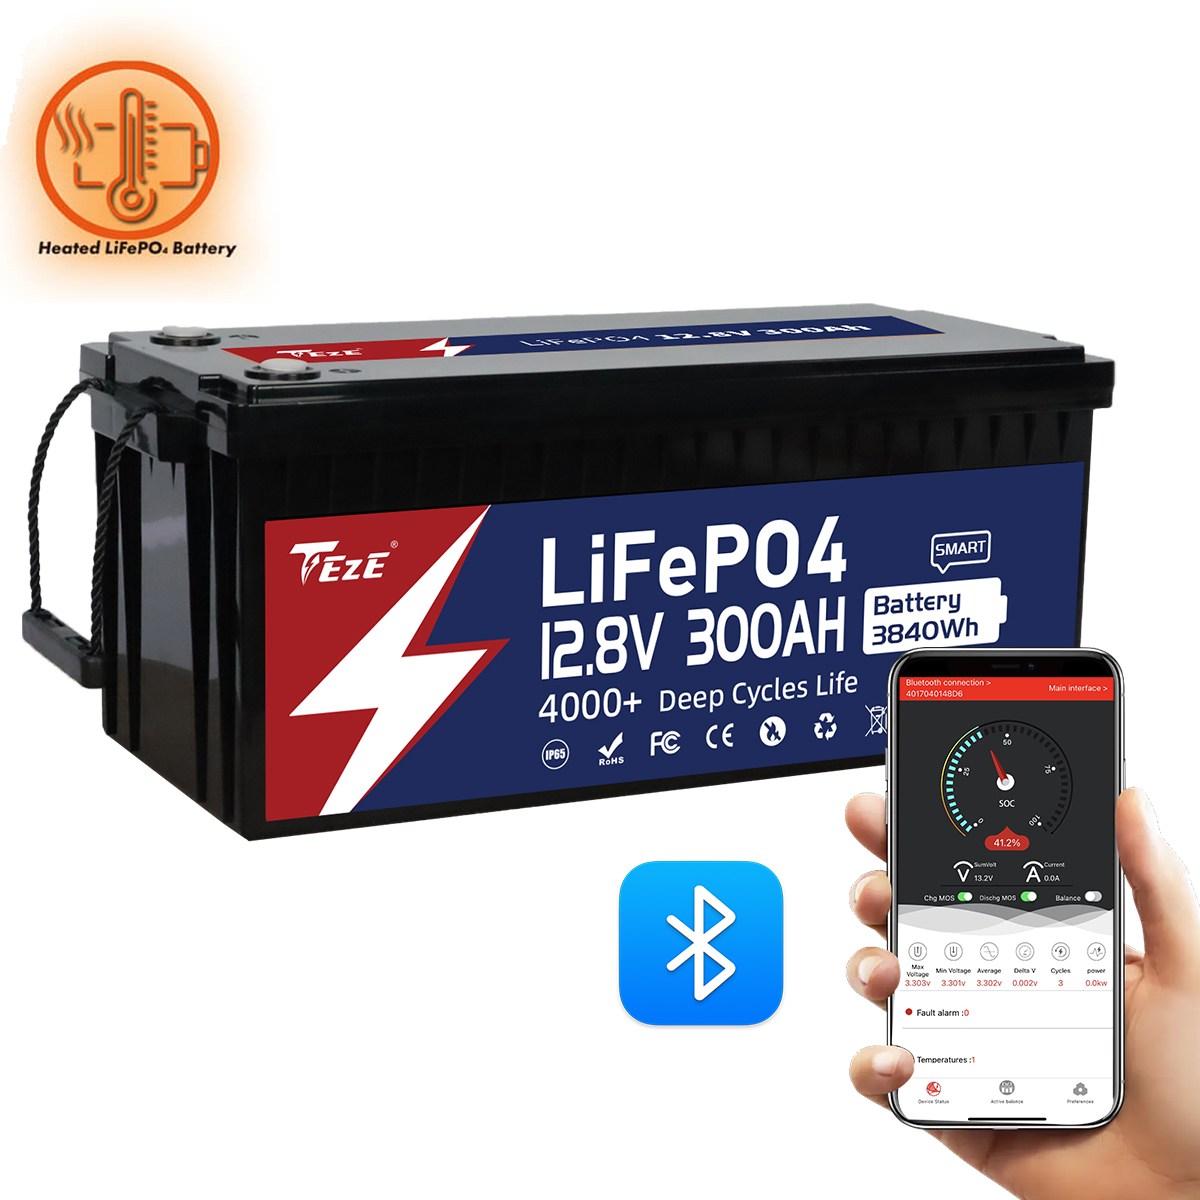 TezePower 12V 300Ah LiFePO4 Battery with Bluetooth, Self-heating and Active Balancer, Built-in 200A Daly BMS(Bluetooth Built-in Version)-TezePower